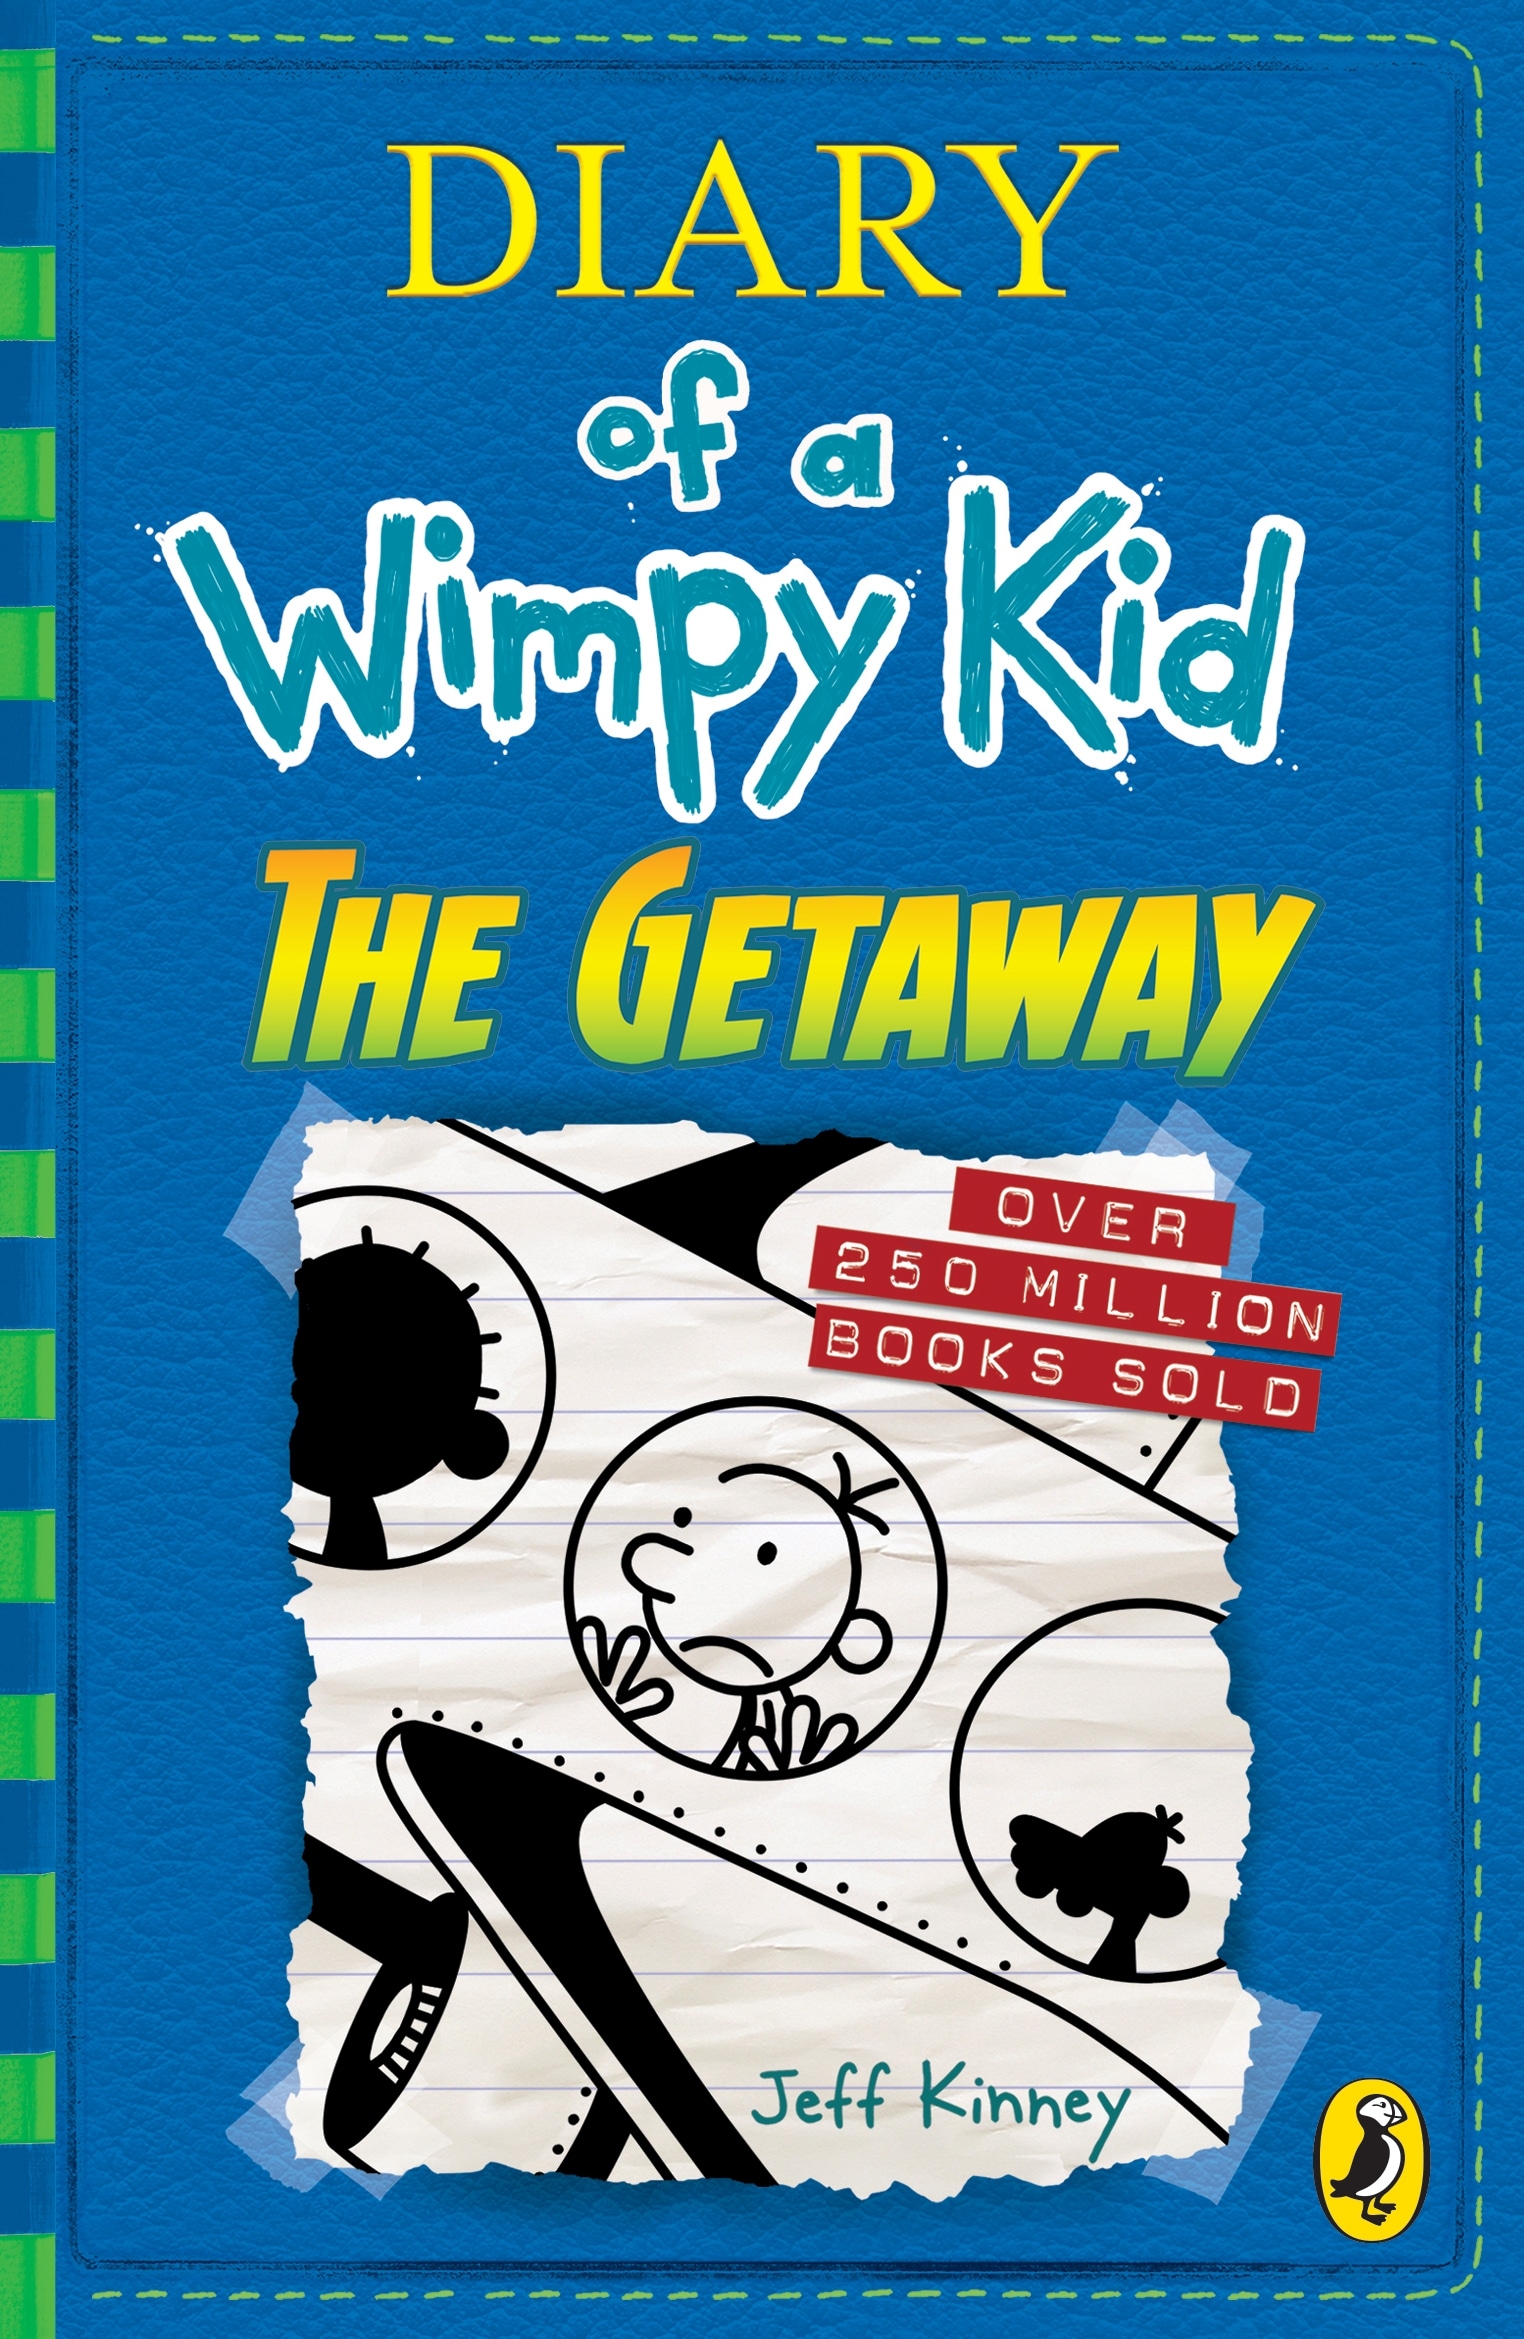 Book “Diary of a Wimpy Kid: The Getaway (Book 12)” by Jeff Kinney — January 24, 2019